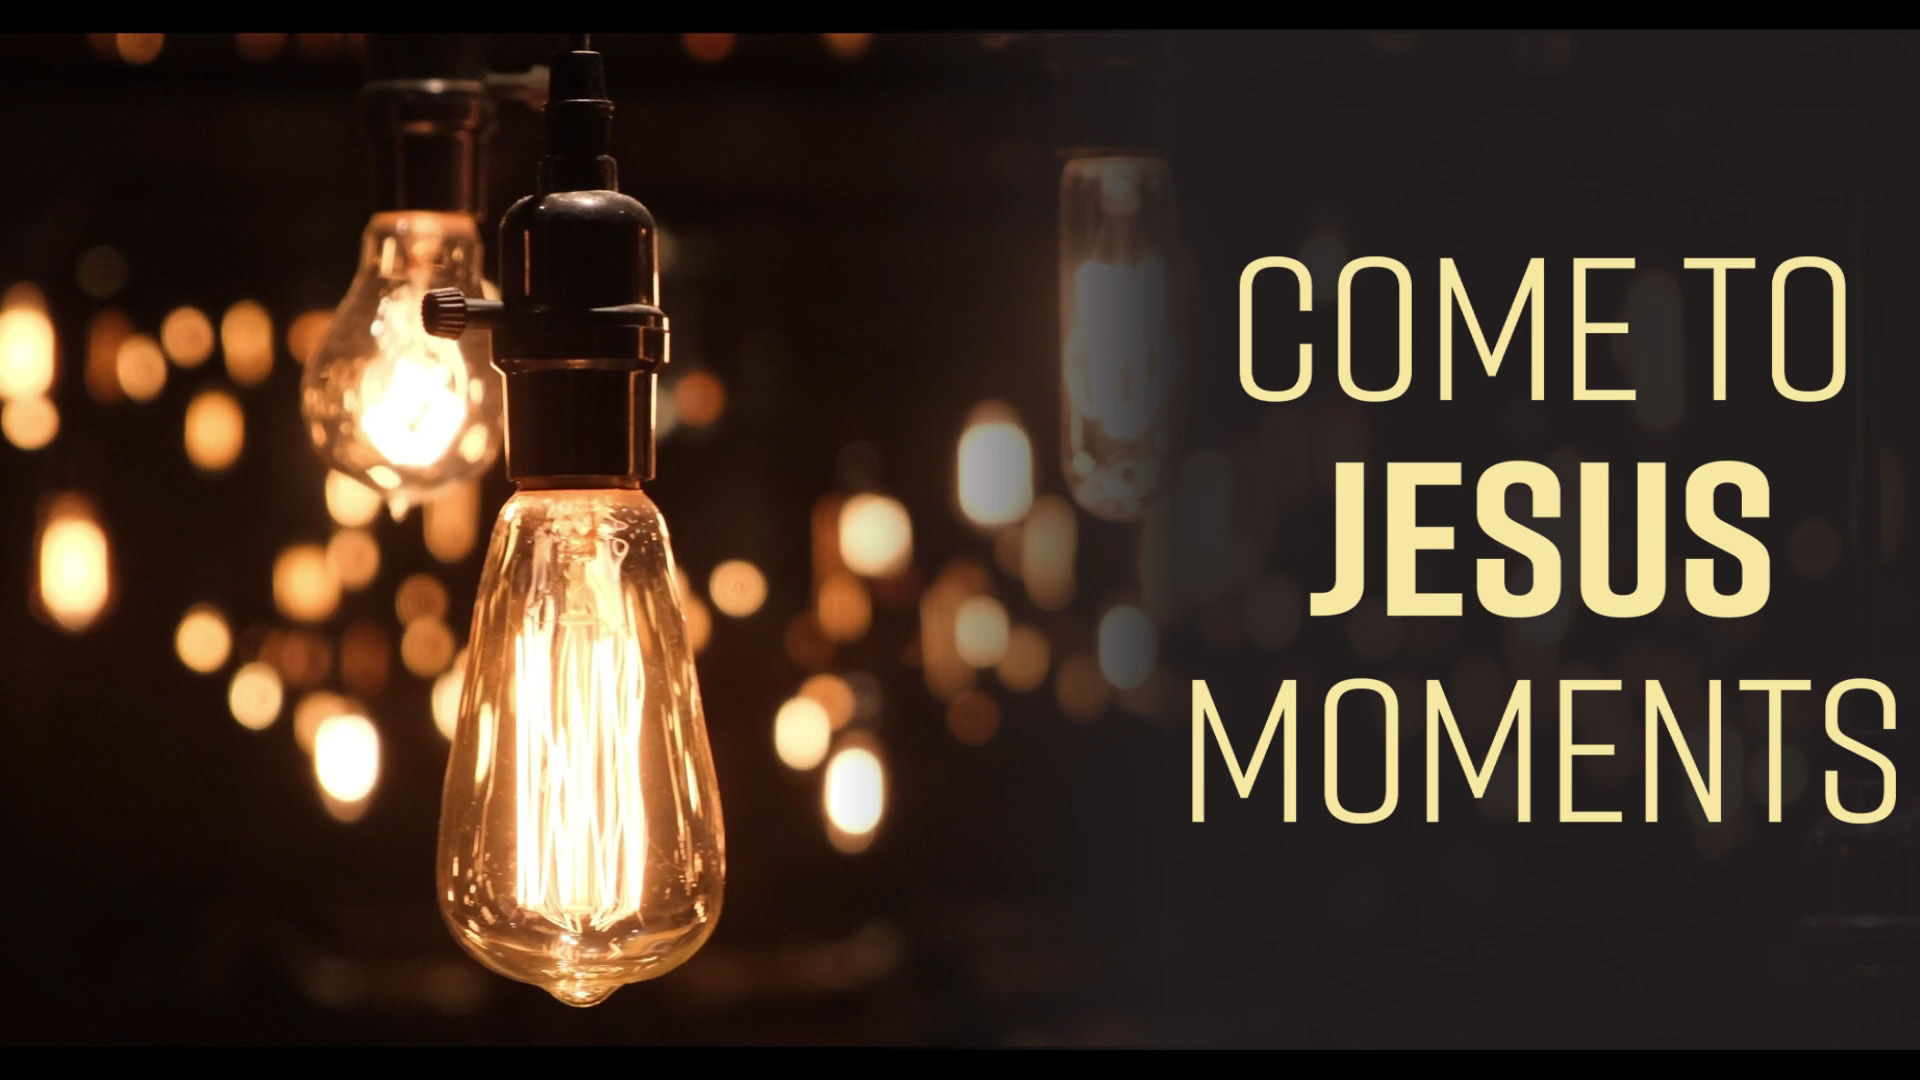 Come to Jesus Moments